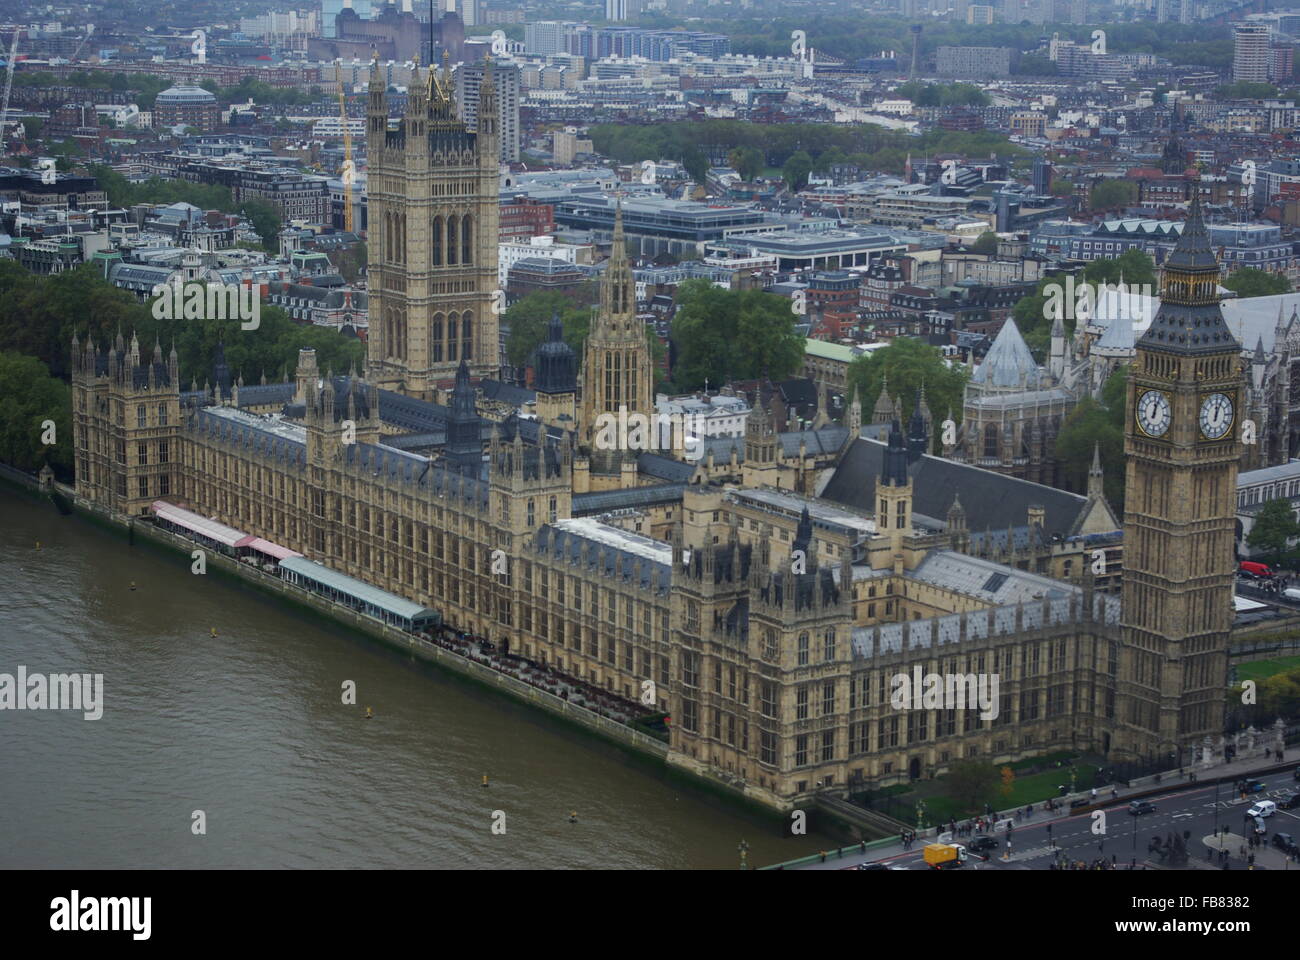 Palace of Westminster und Houses of Parliament in London, England. Stockfoto